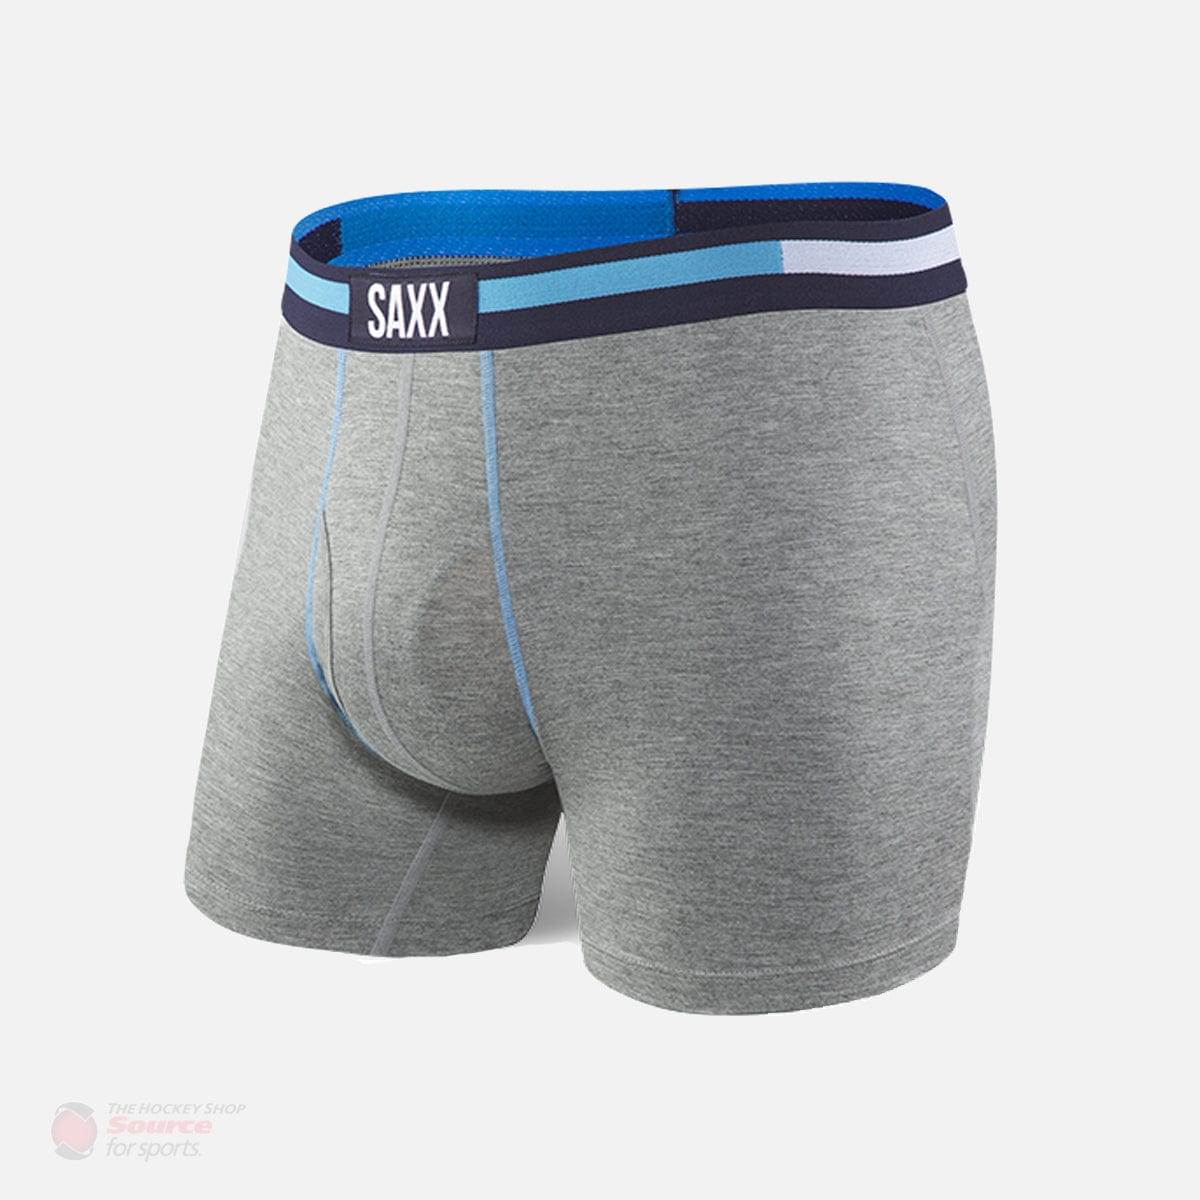 Saxx Ultra Spring Training Boxers - 2 Pack